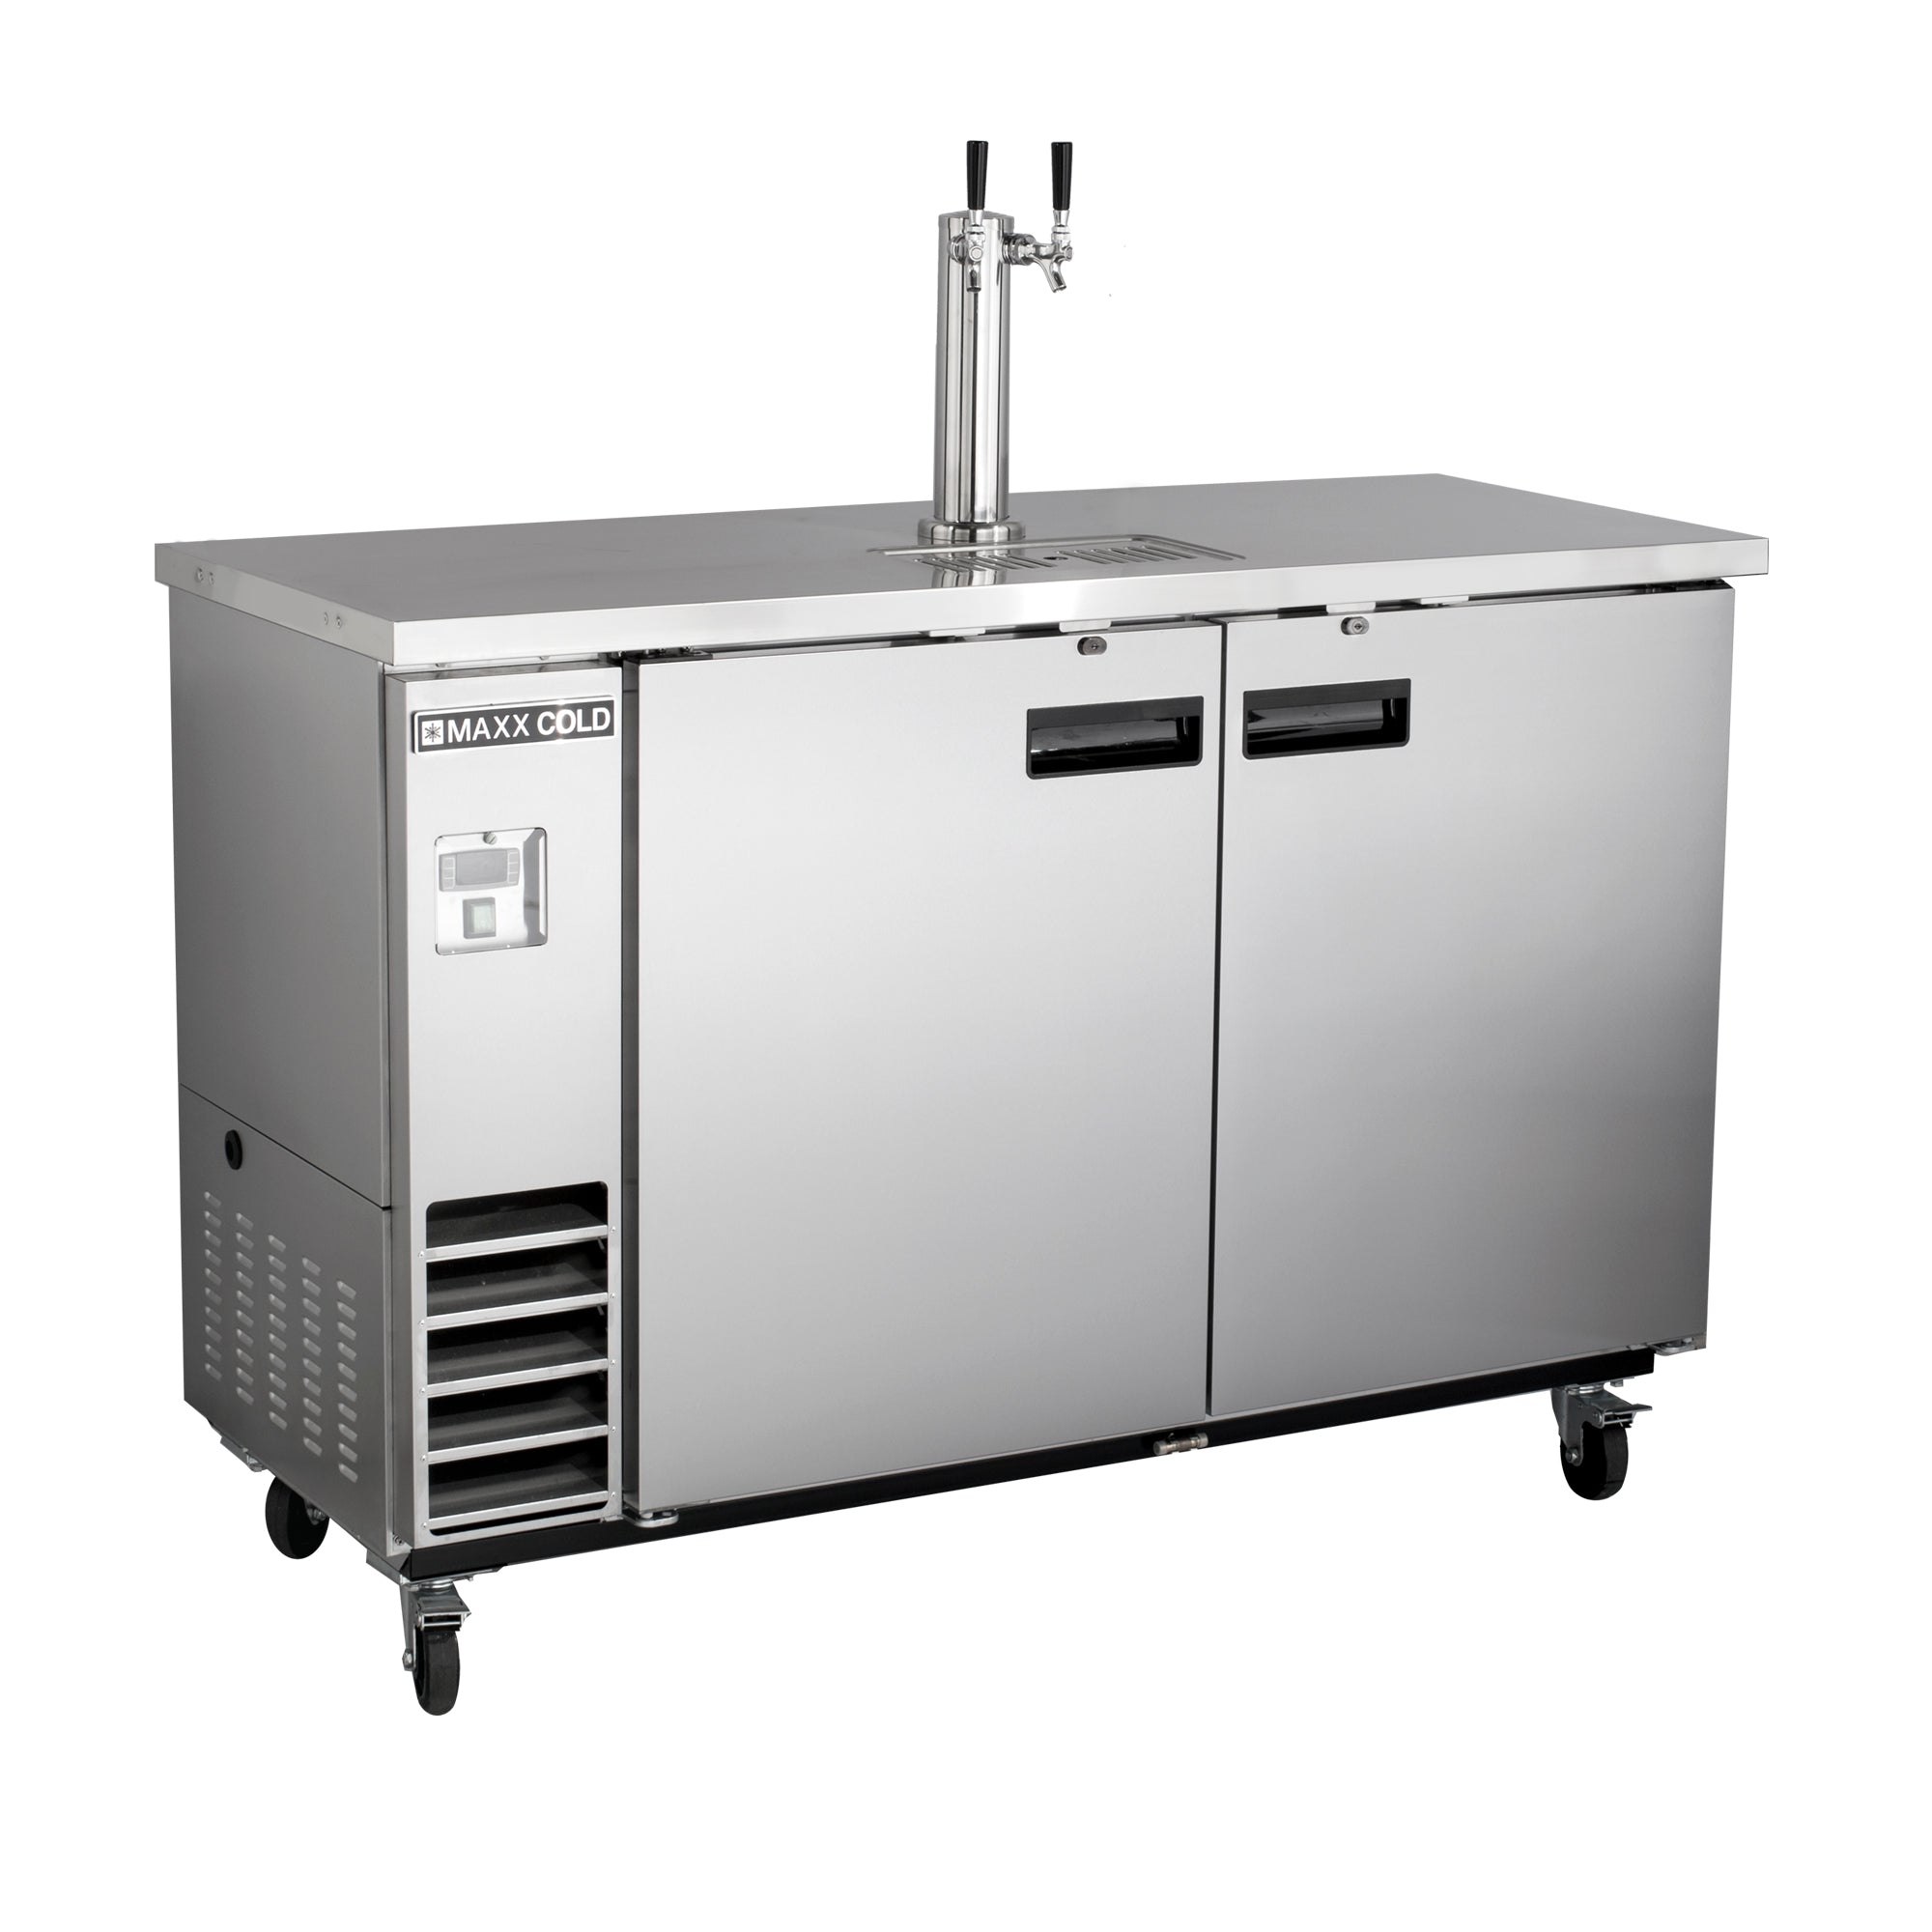 Maxx Cold - MXBD60-1SHC, Maxx Cold Single Tower, 2 Tap Beer Dispenser, 61"W, 14.2 cu. ft., 2 Barrels/Kegs (402L) Storage Capacity, in Stainless Steel